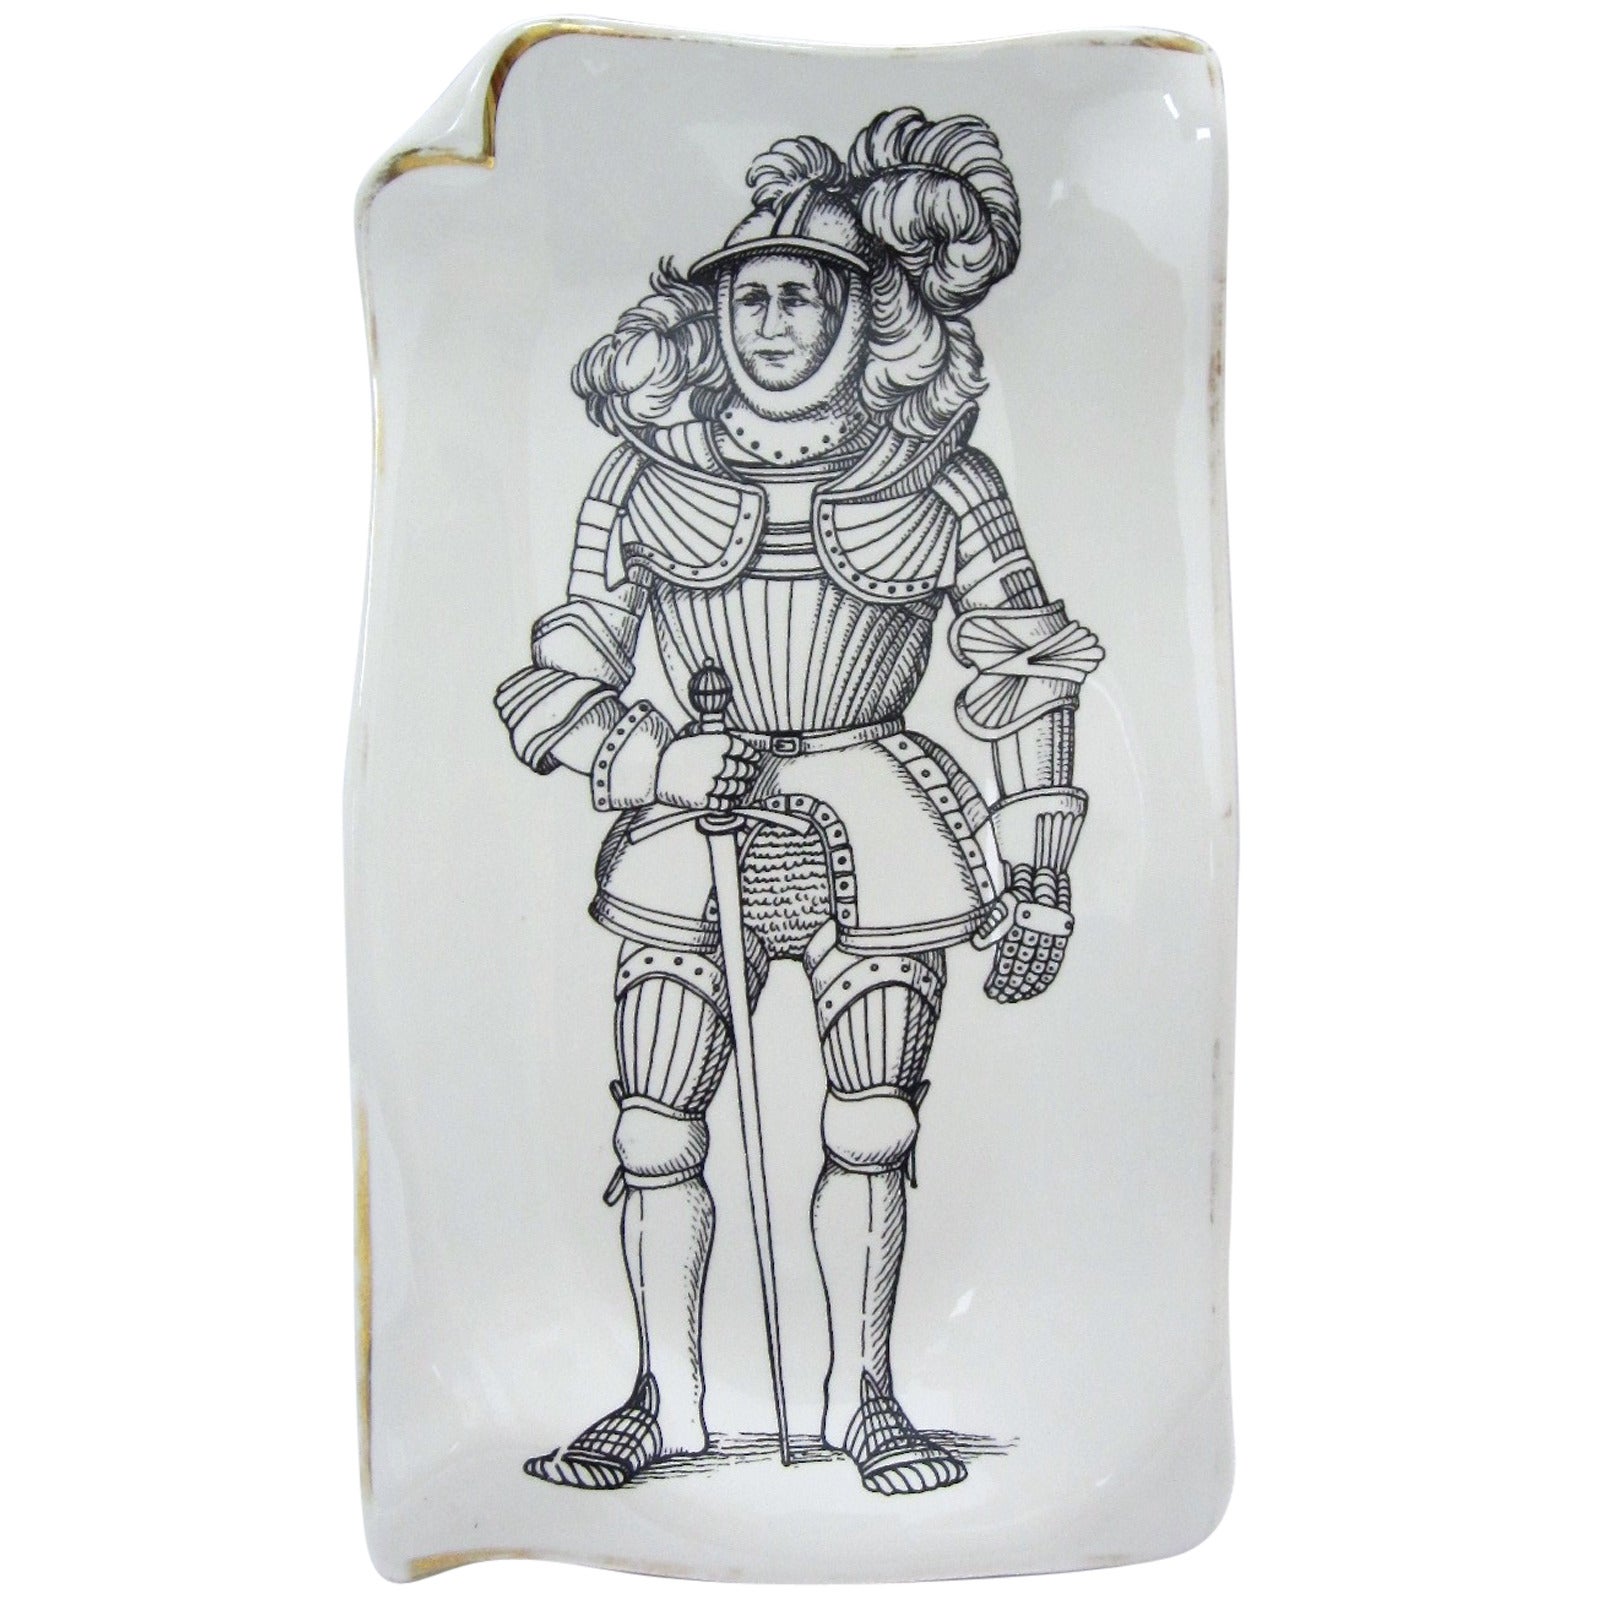 Porcelain Turned-Edge Plate with Design by Piero Fornasetti for Felice Galbiati For Sale